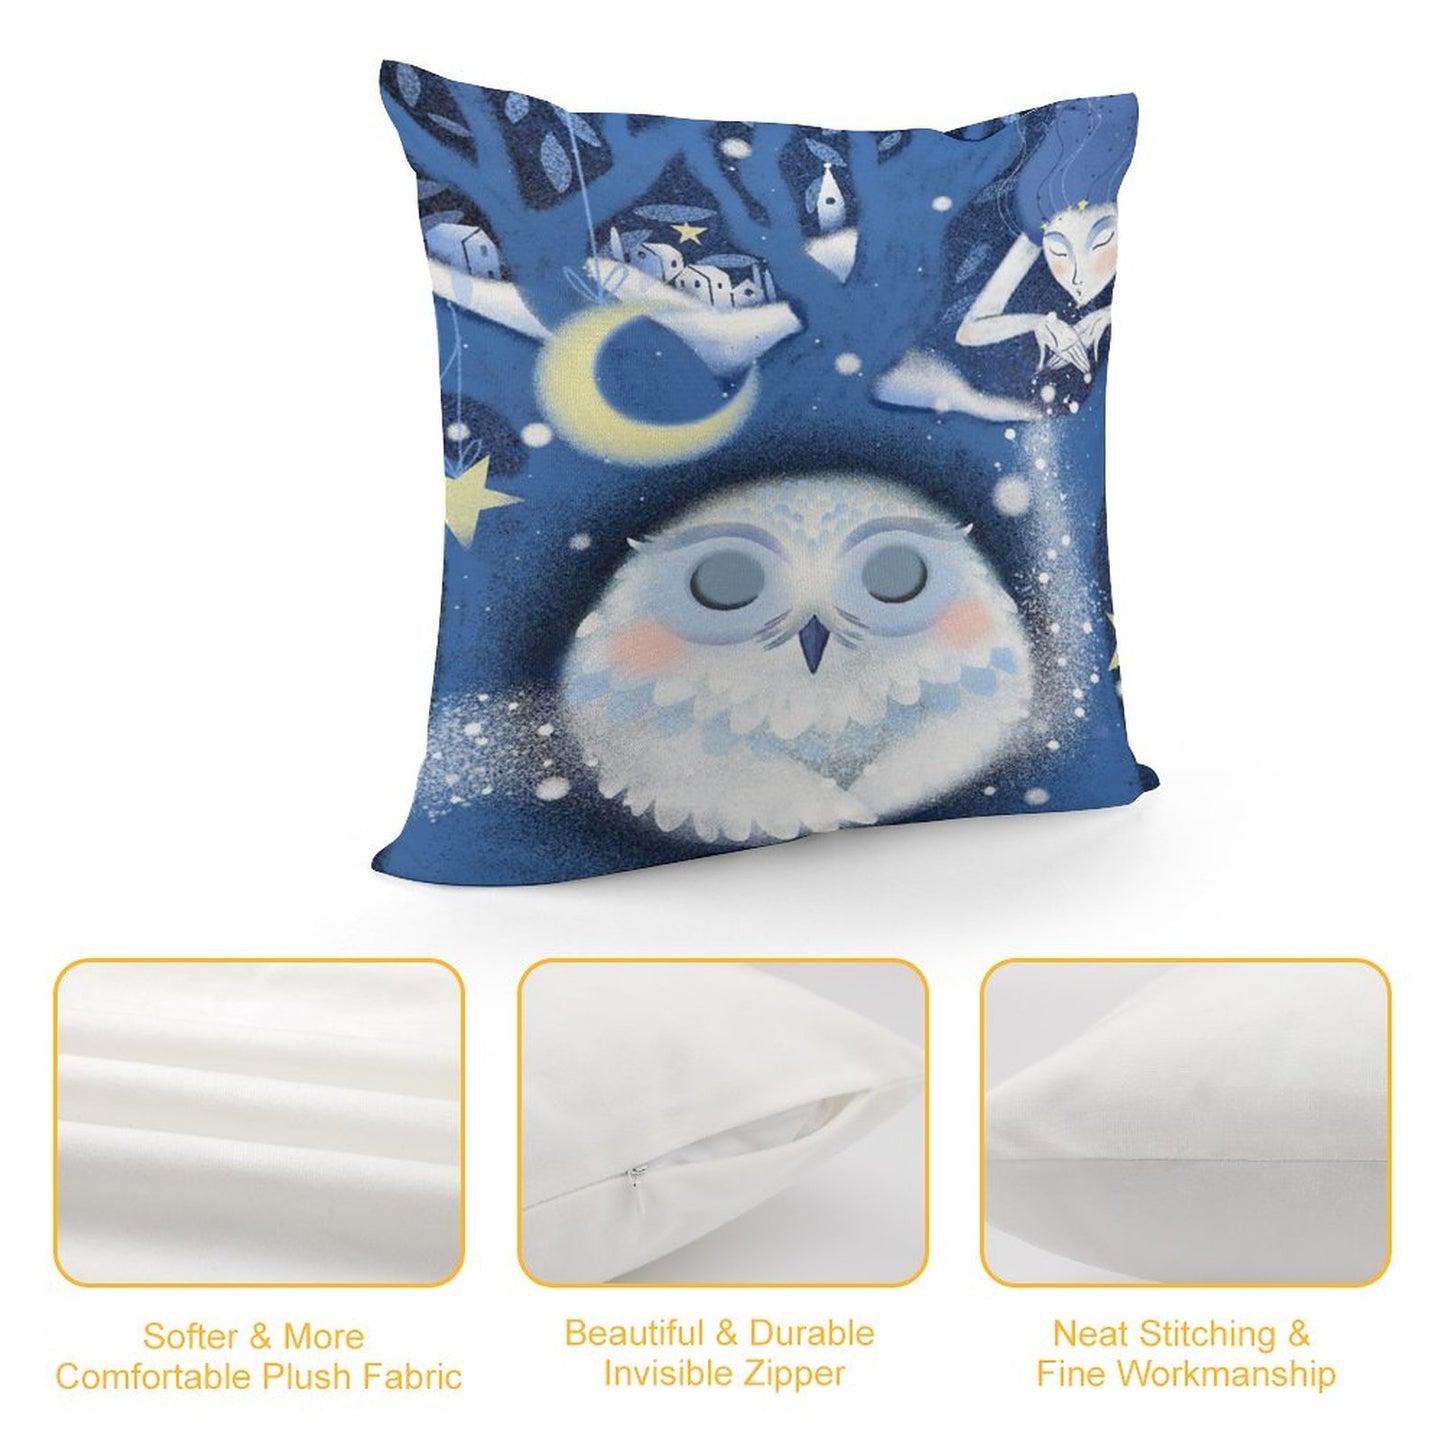 Online DIY Plush Pillow Cover 18"×18" Double-sided Printing Only Pillowcase